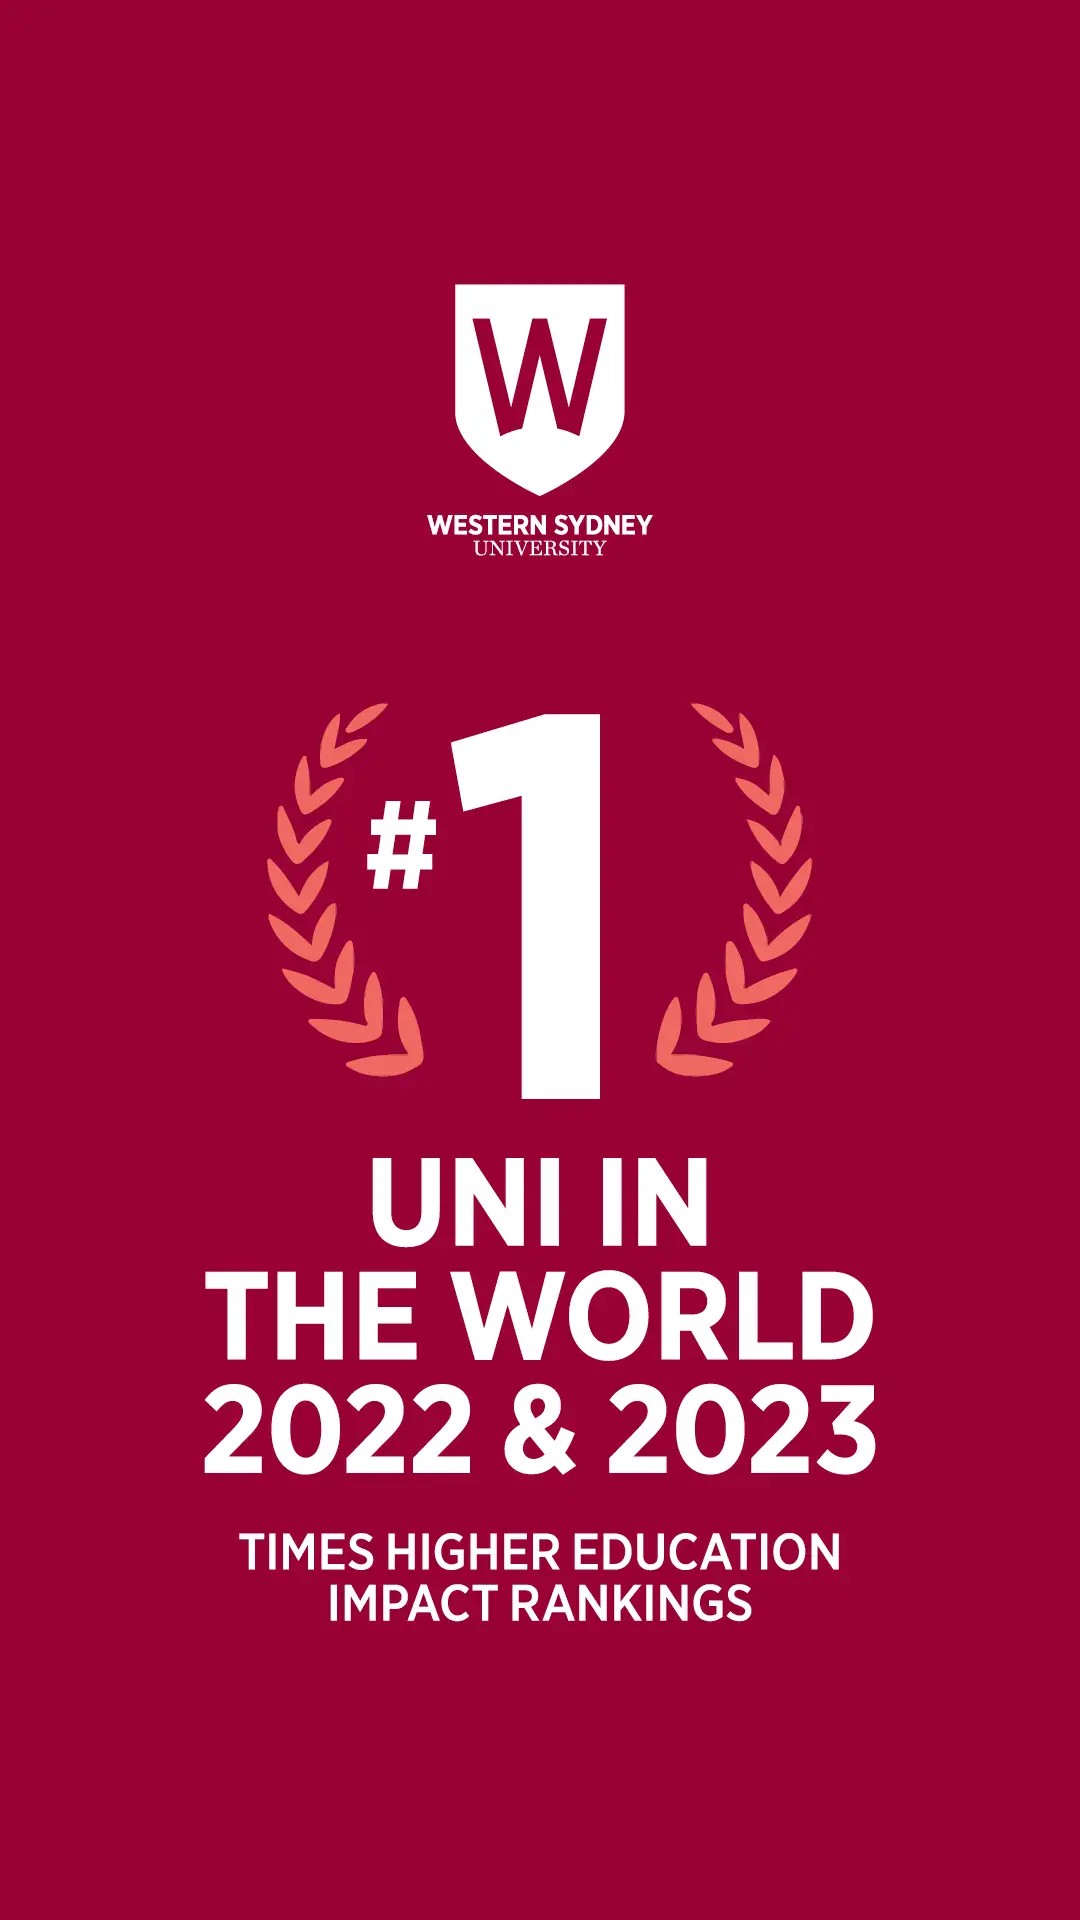 Western Sydney University ranked #1 in the world in 2022 & 2023. Times Higher Education Impact Rankings.